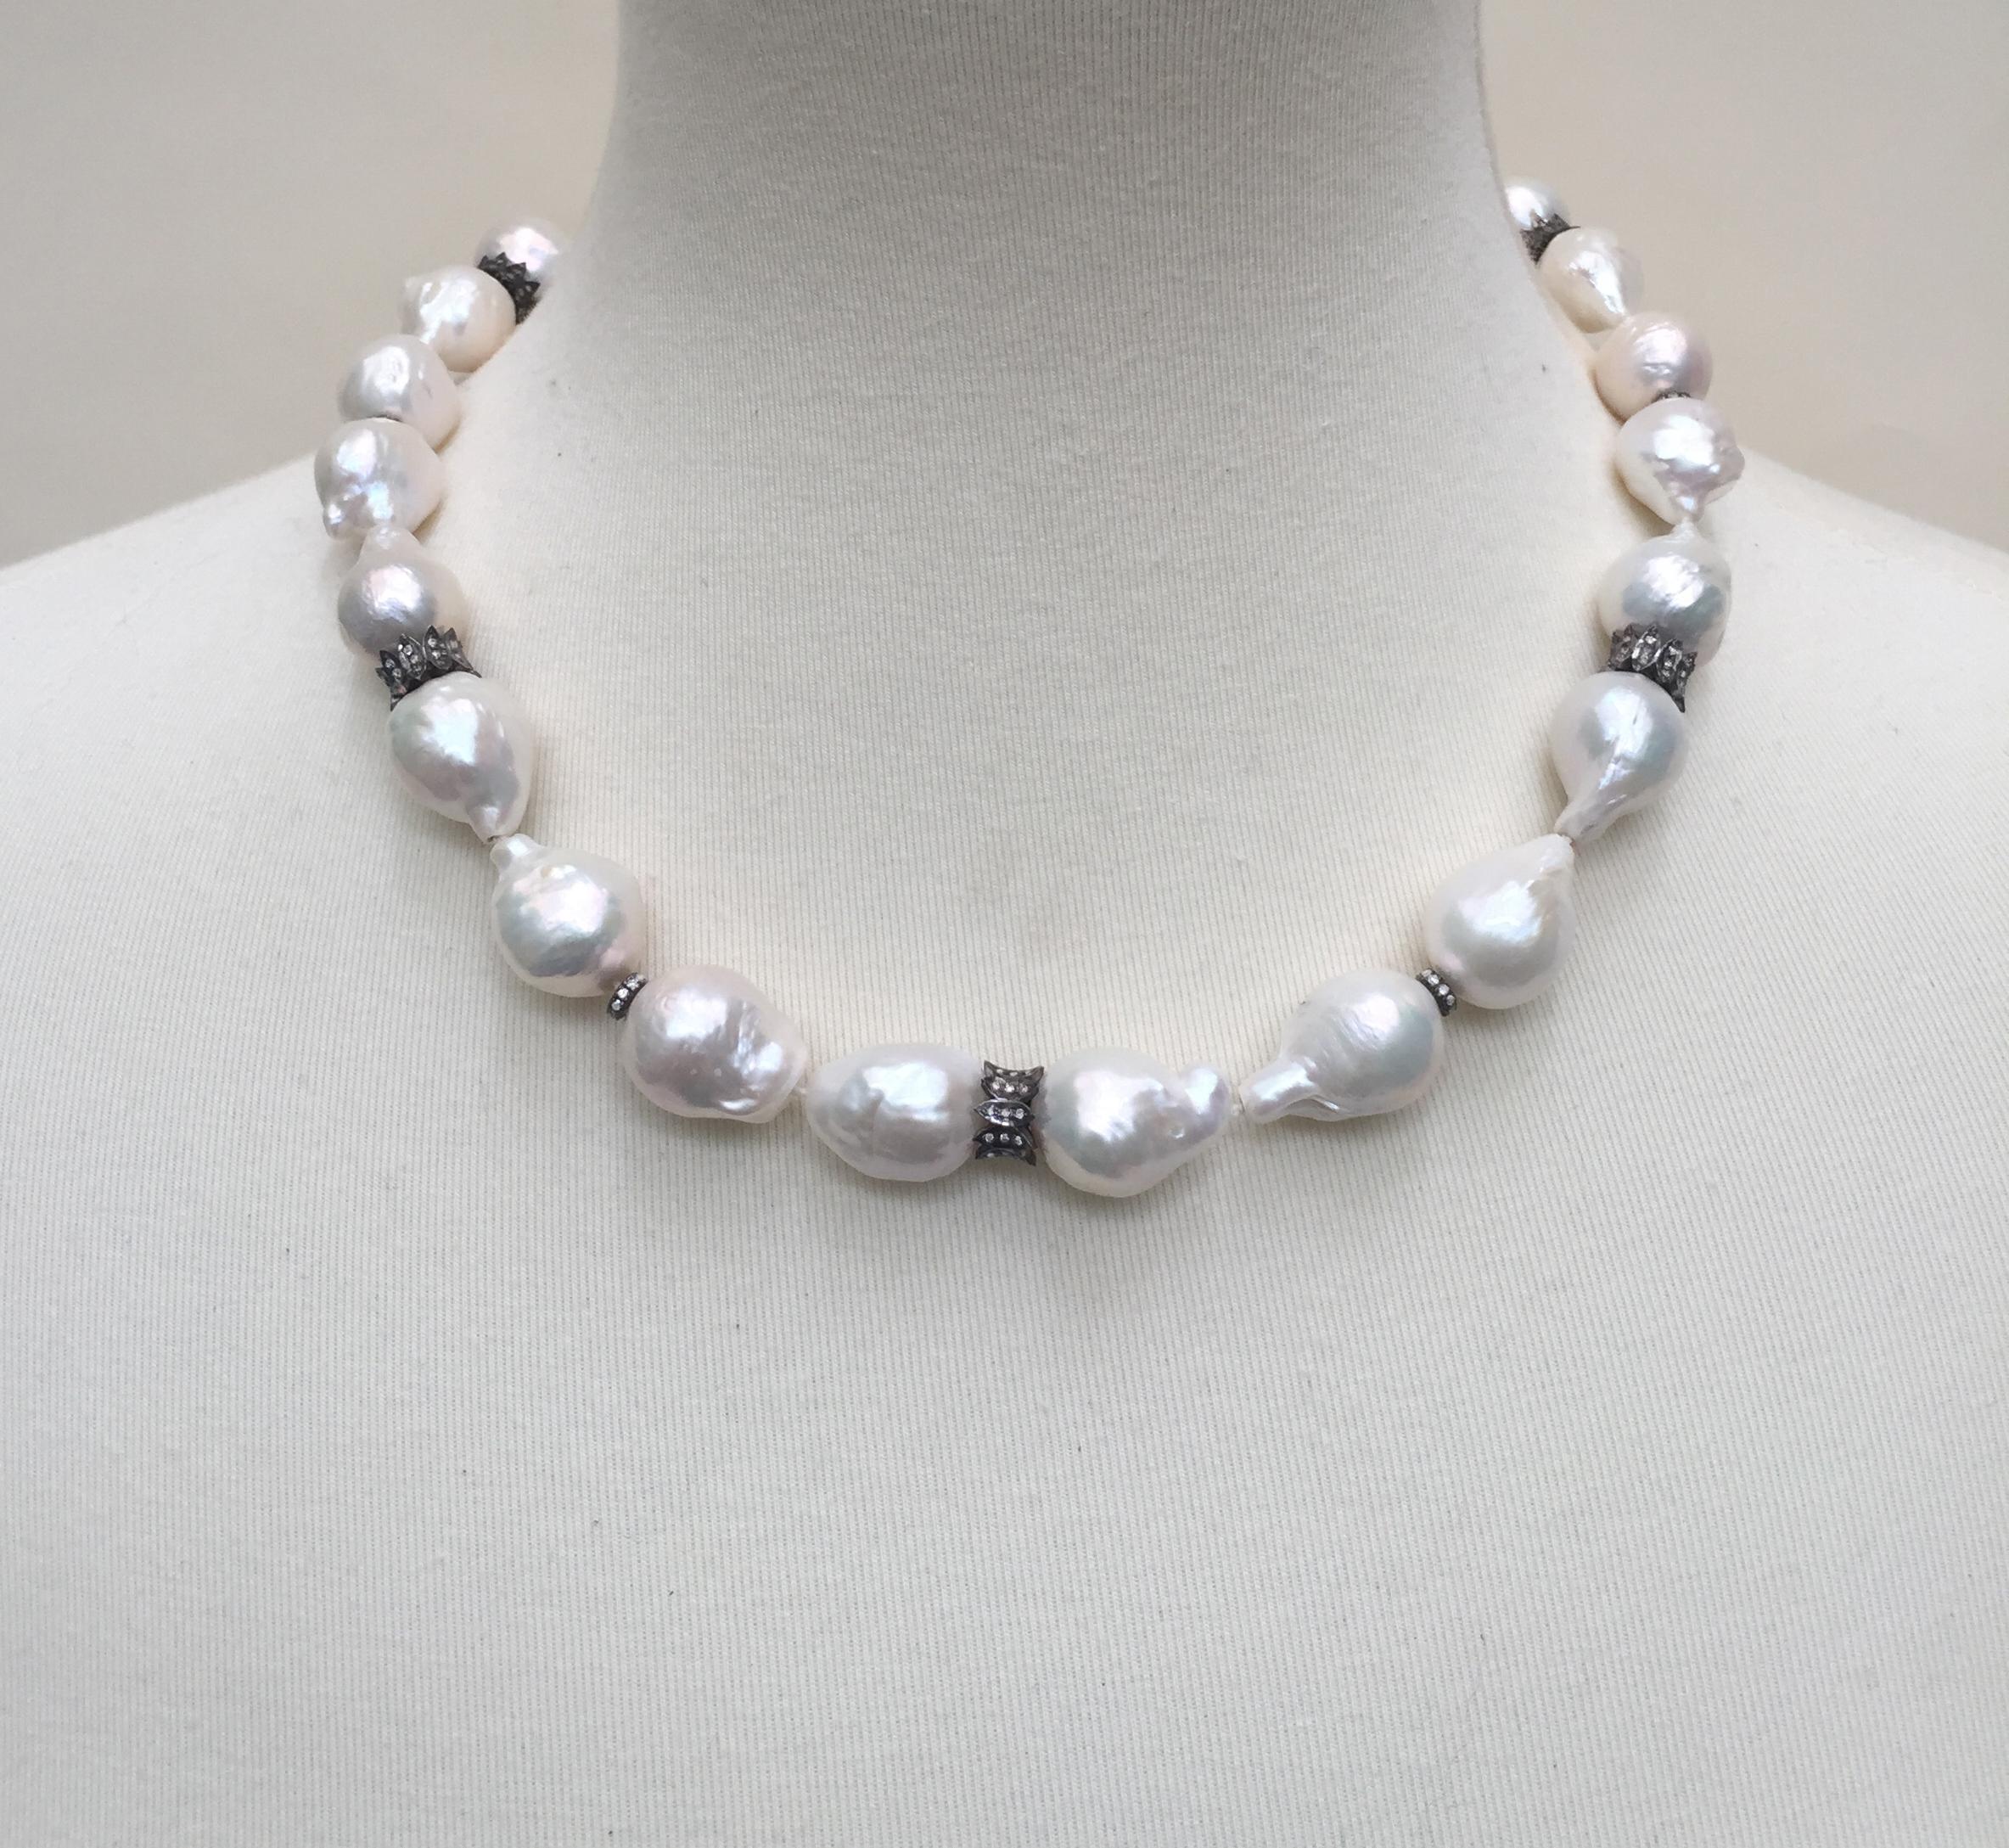 This striking necklace is made with large baroque white pearls with diamond and oxidite silver dividers and clasp. Marina J. composed the necklace with irregularly shaped pearls (8-16 mm) that come together in harmony with beautiful silver and